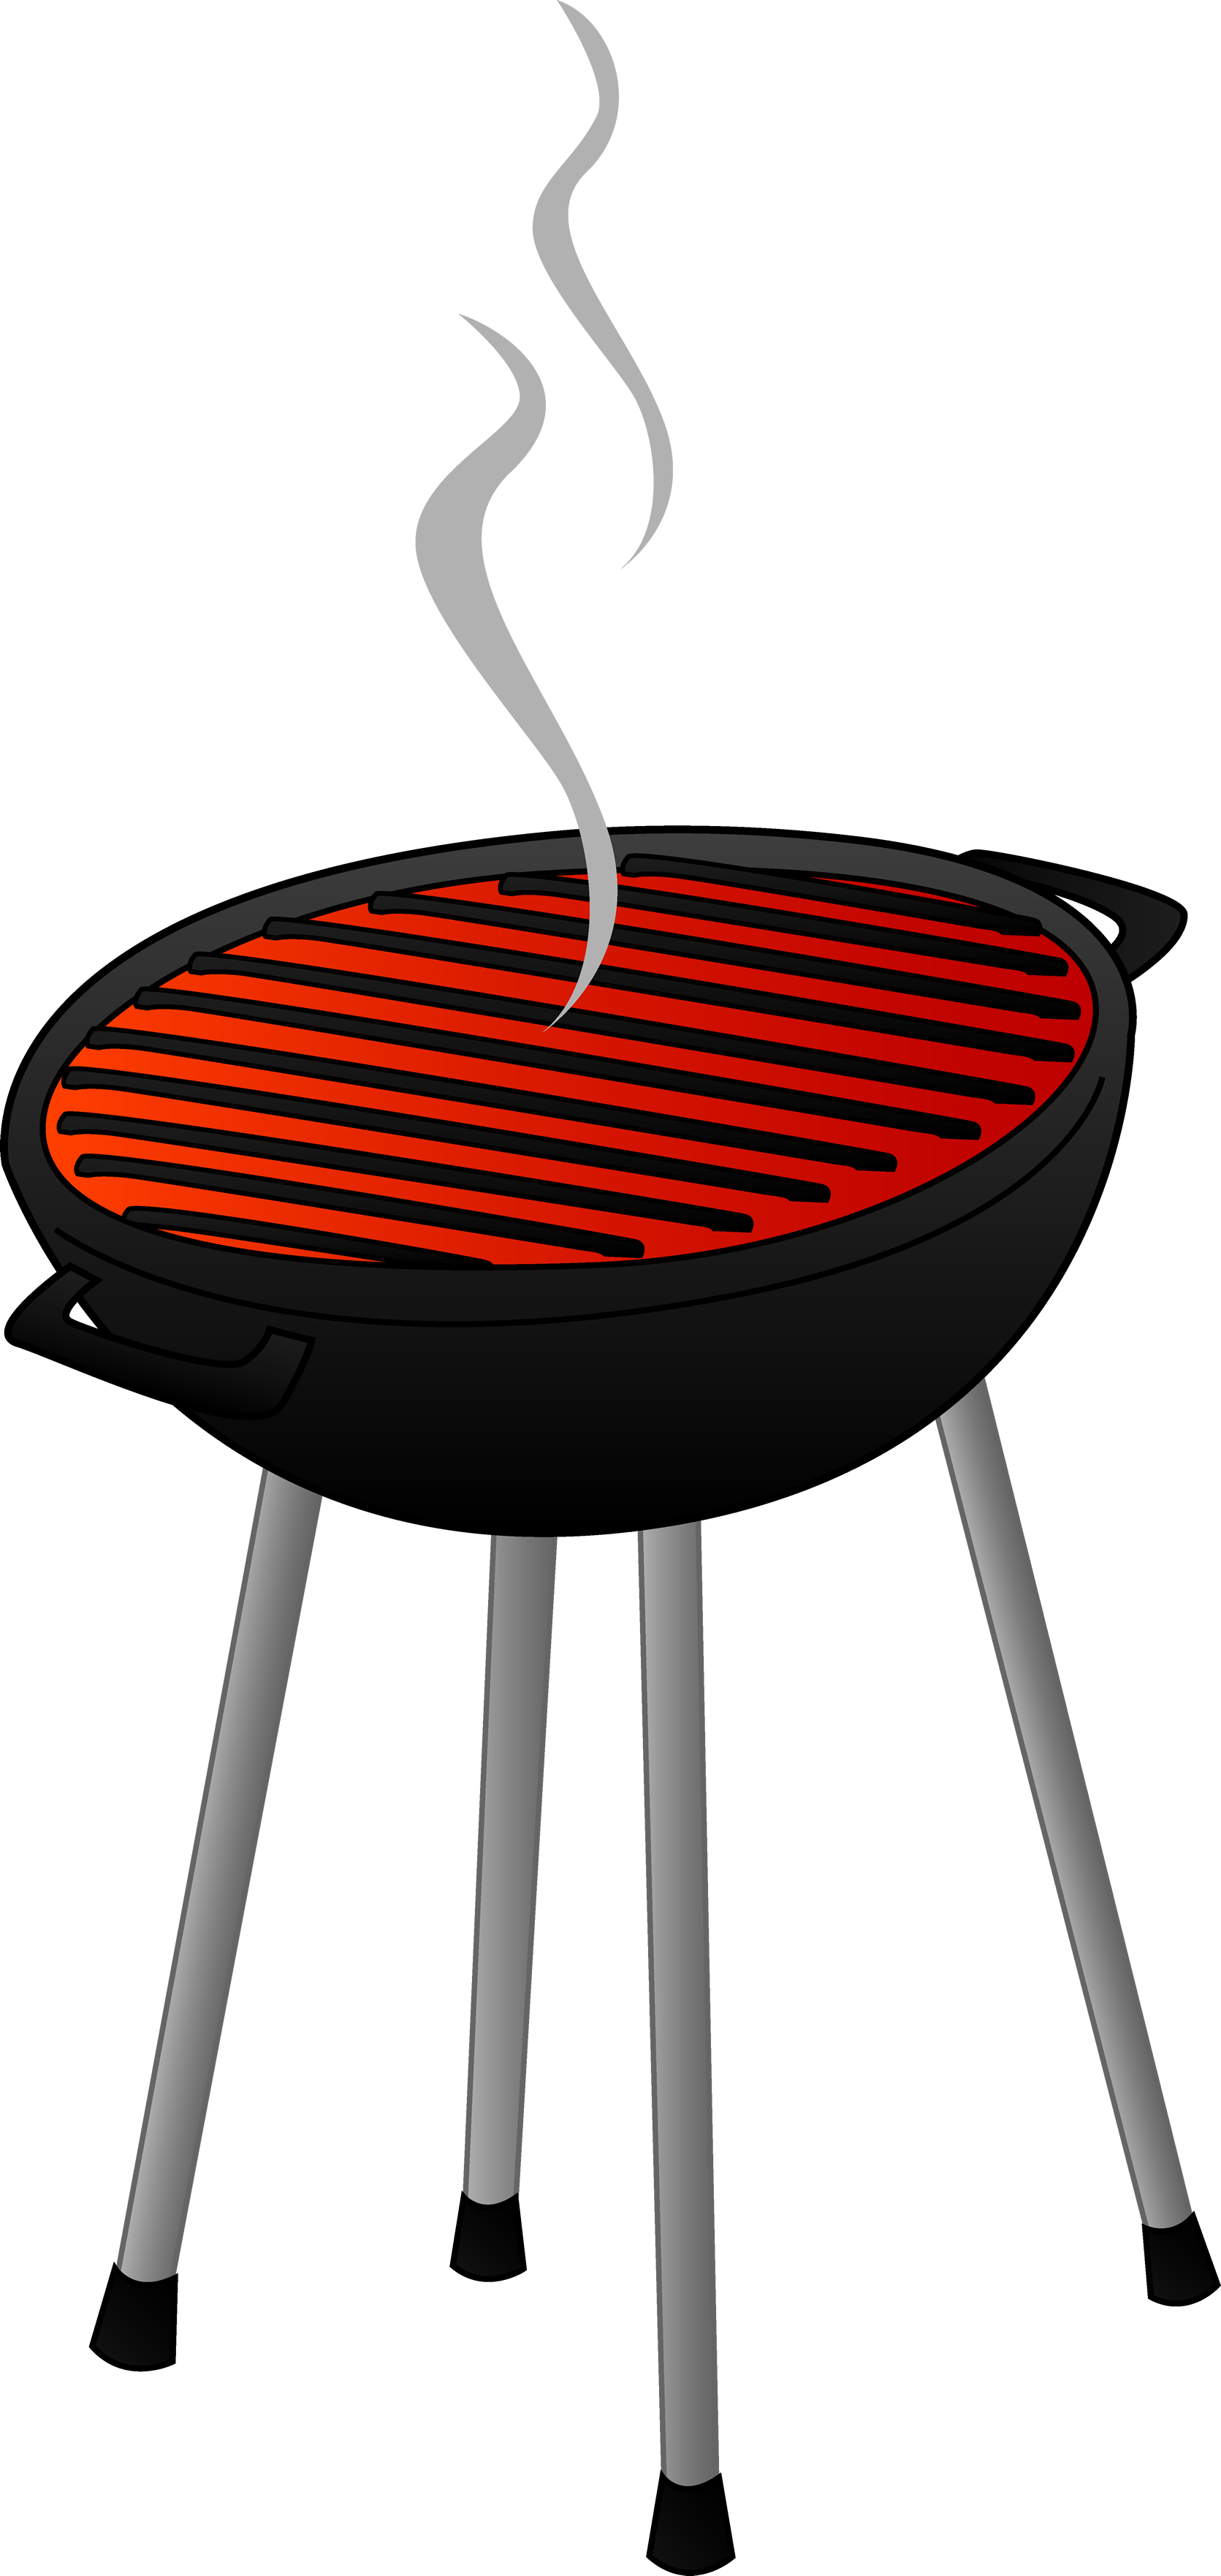 Fire Grill Background PNG Image